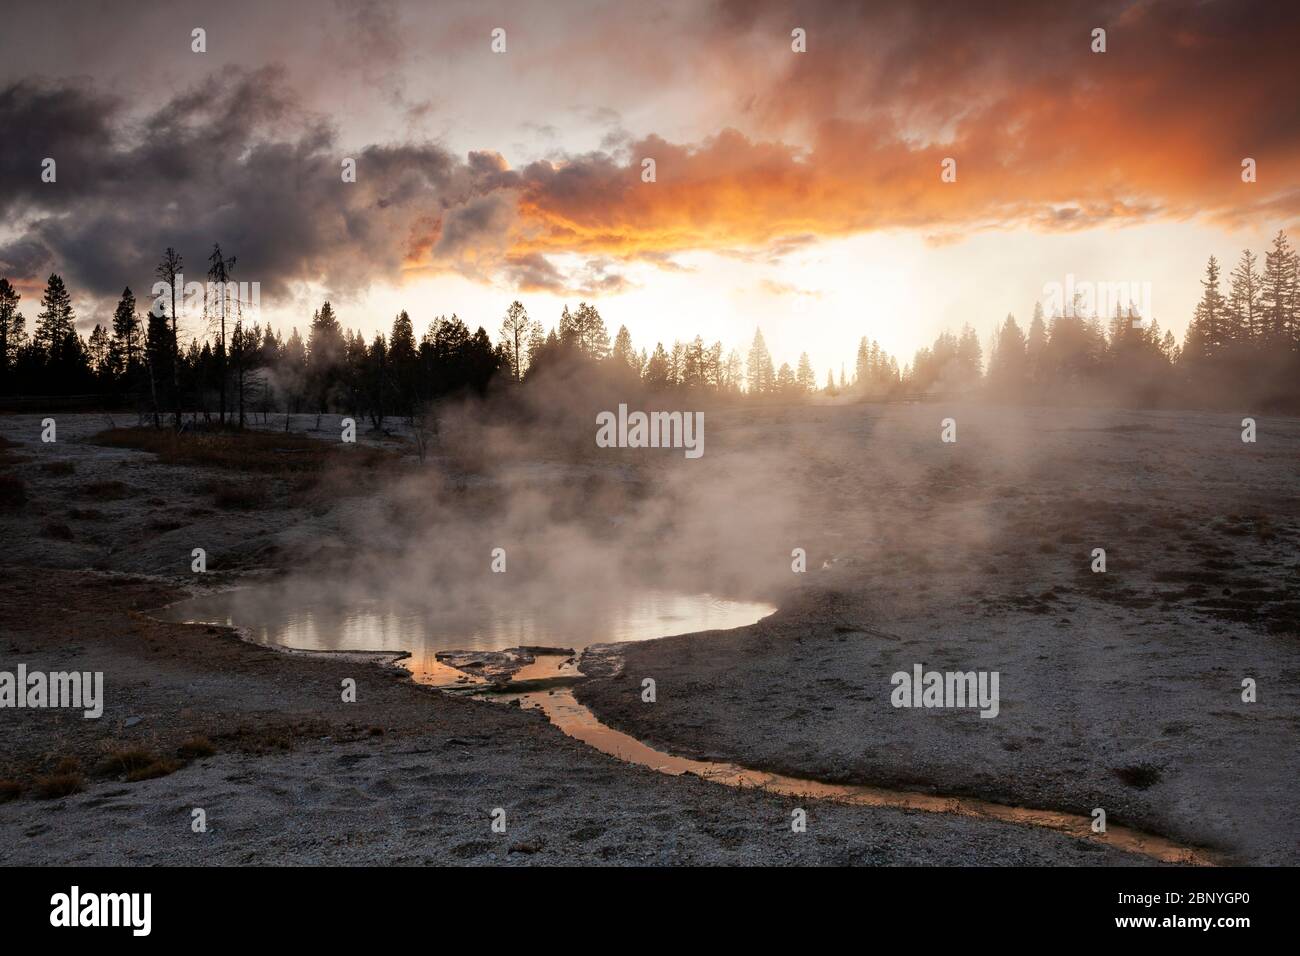 WY04388-00...WYOMING - Sunset and a steaming hotspring at West Thumb Geyser Basin in Yellowstone National Park. Stock Photo